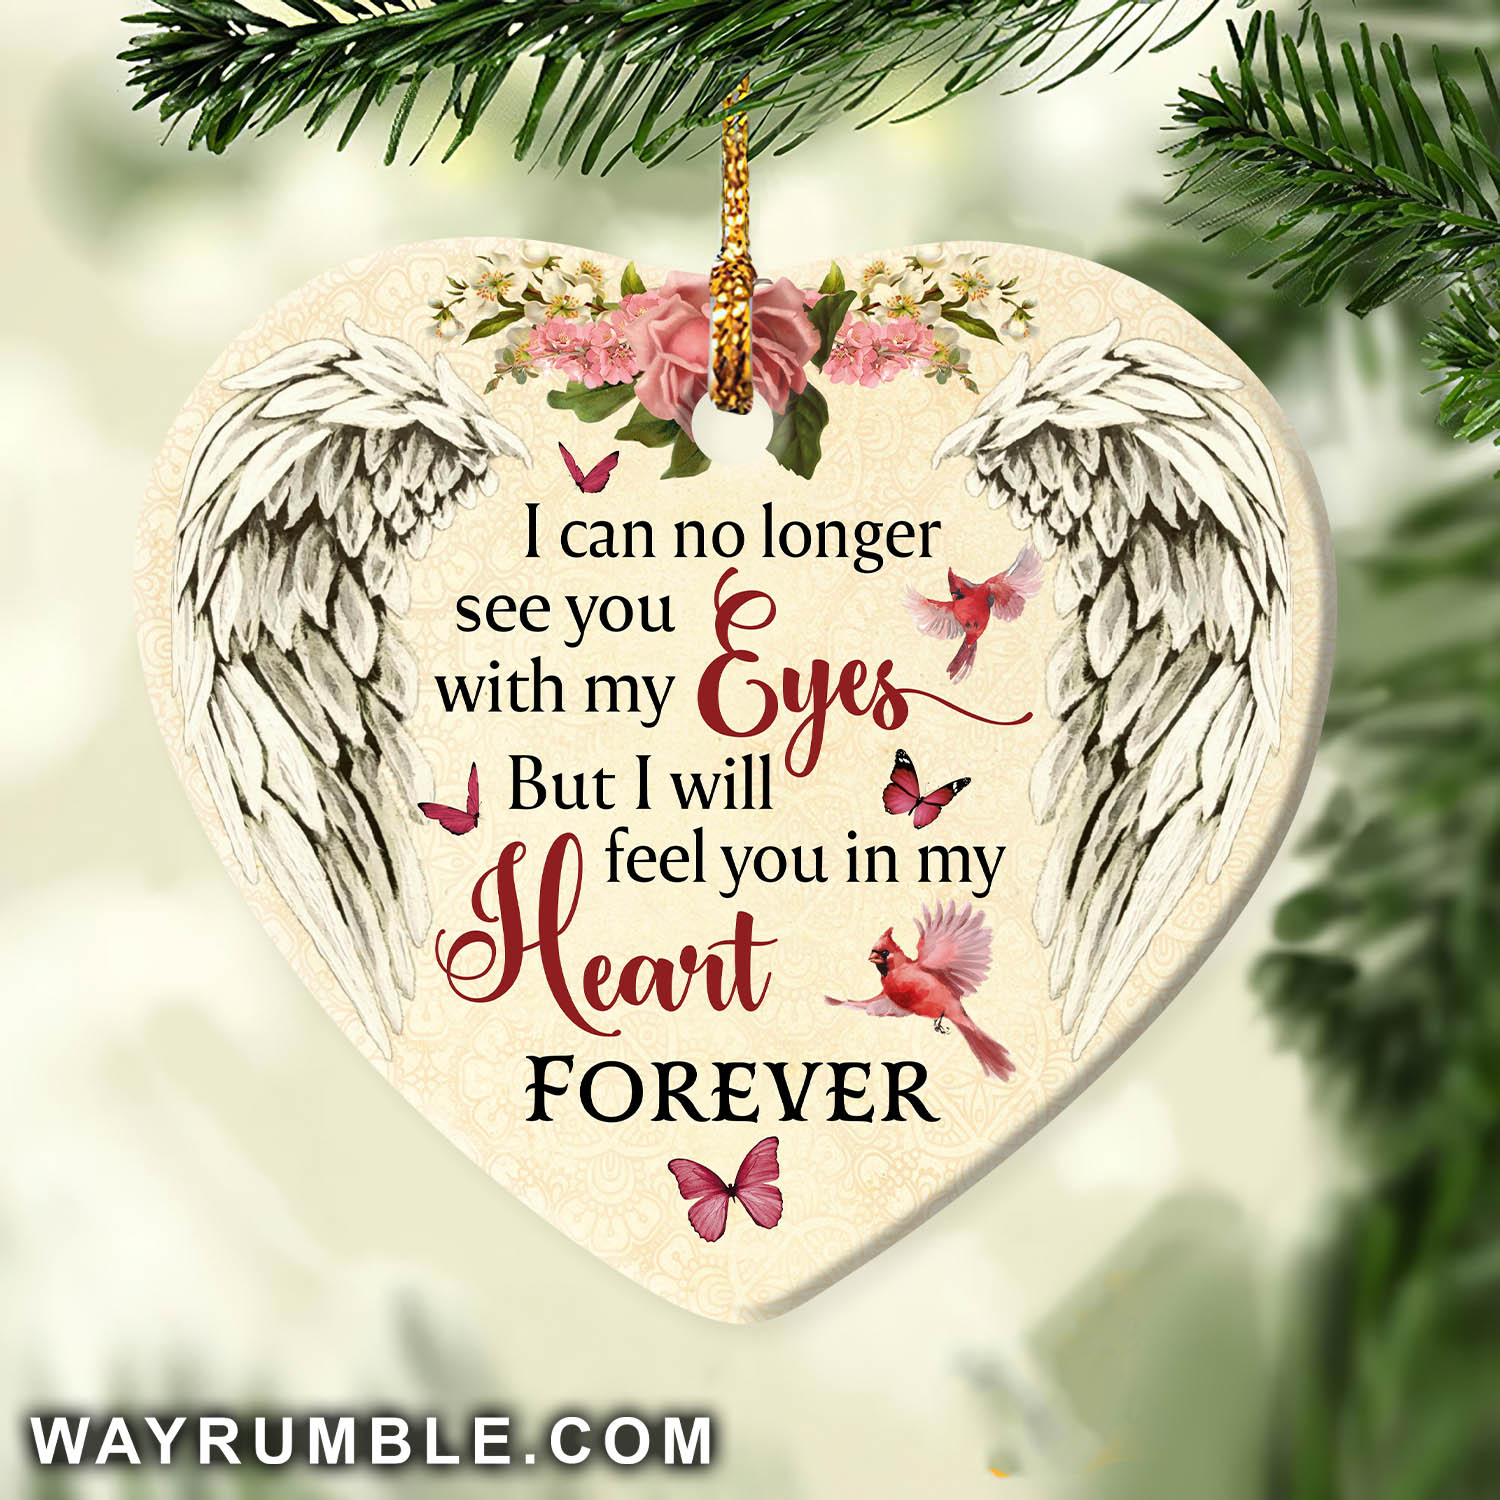 Heaven - Angel wing - I will feel you in my heart forever - Heart Ceramic Ornament